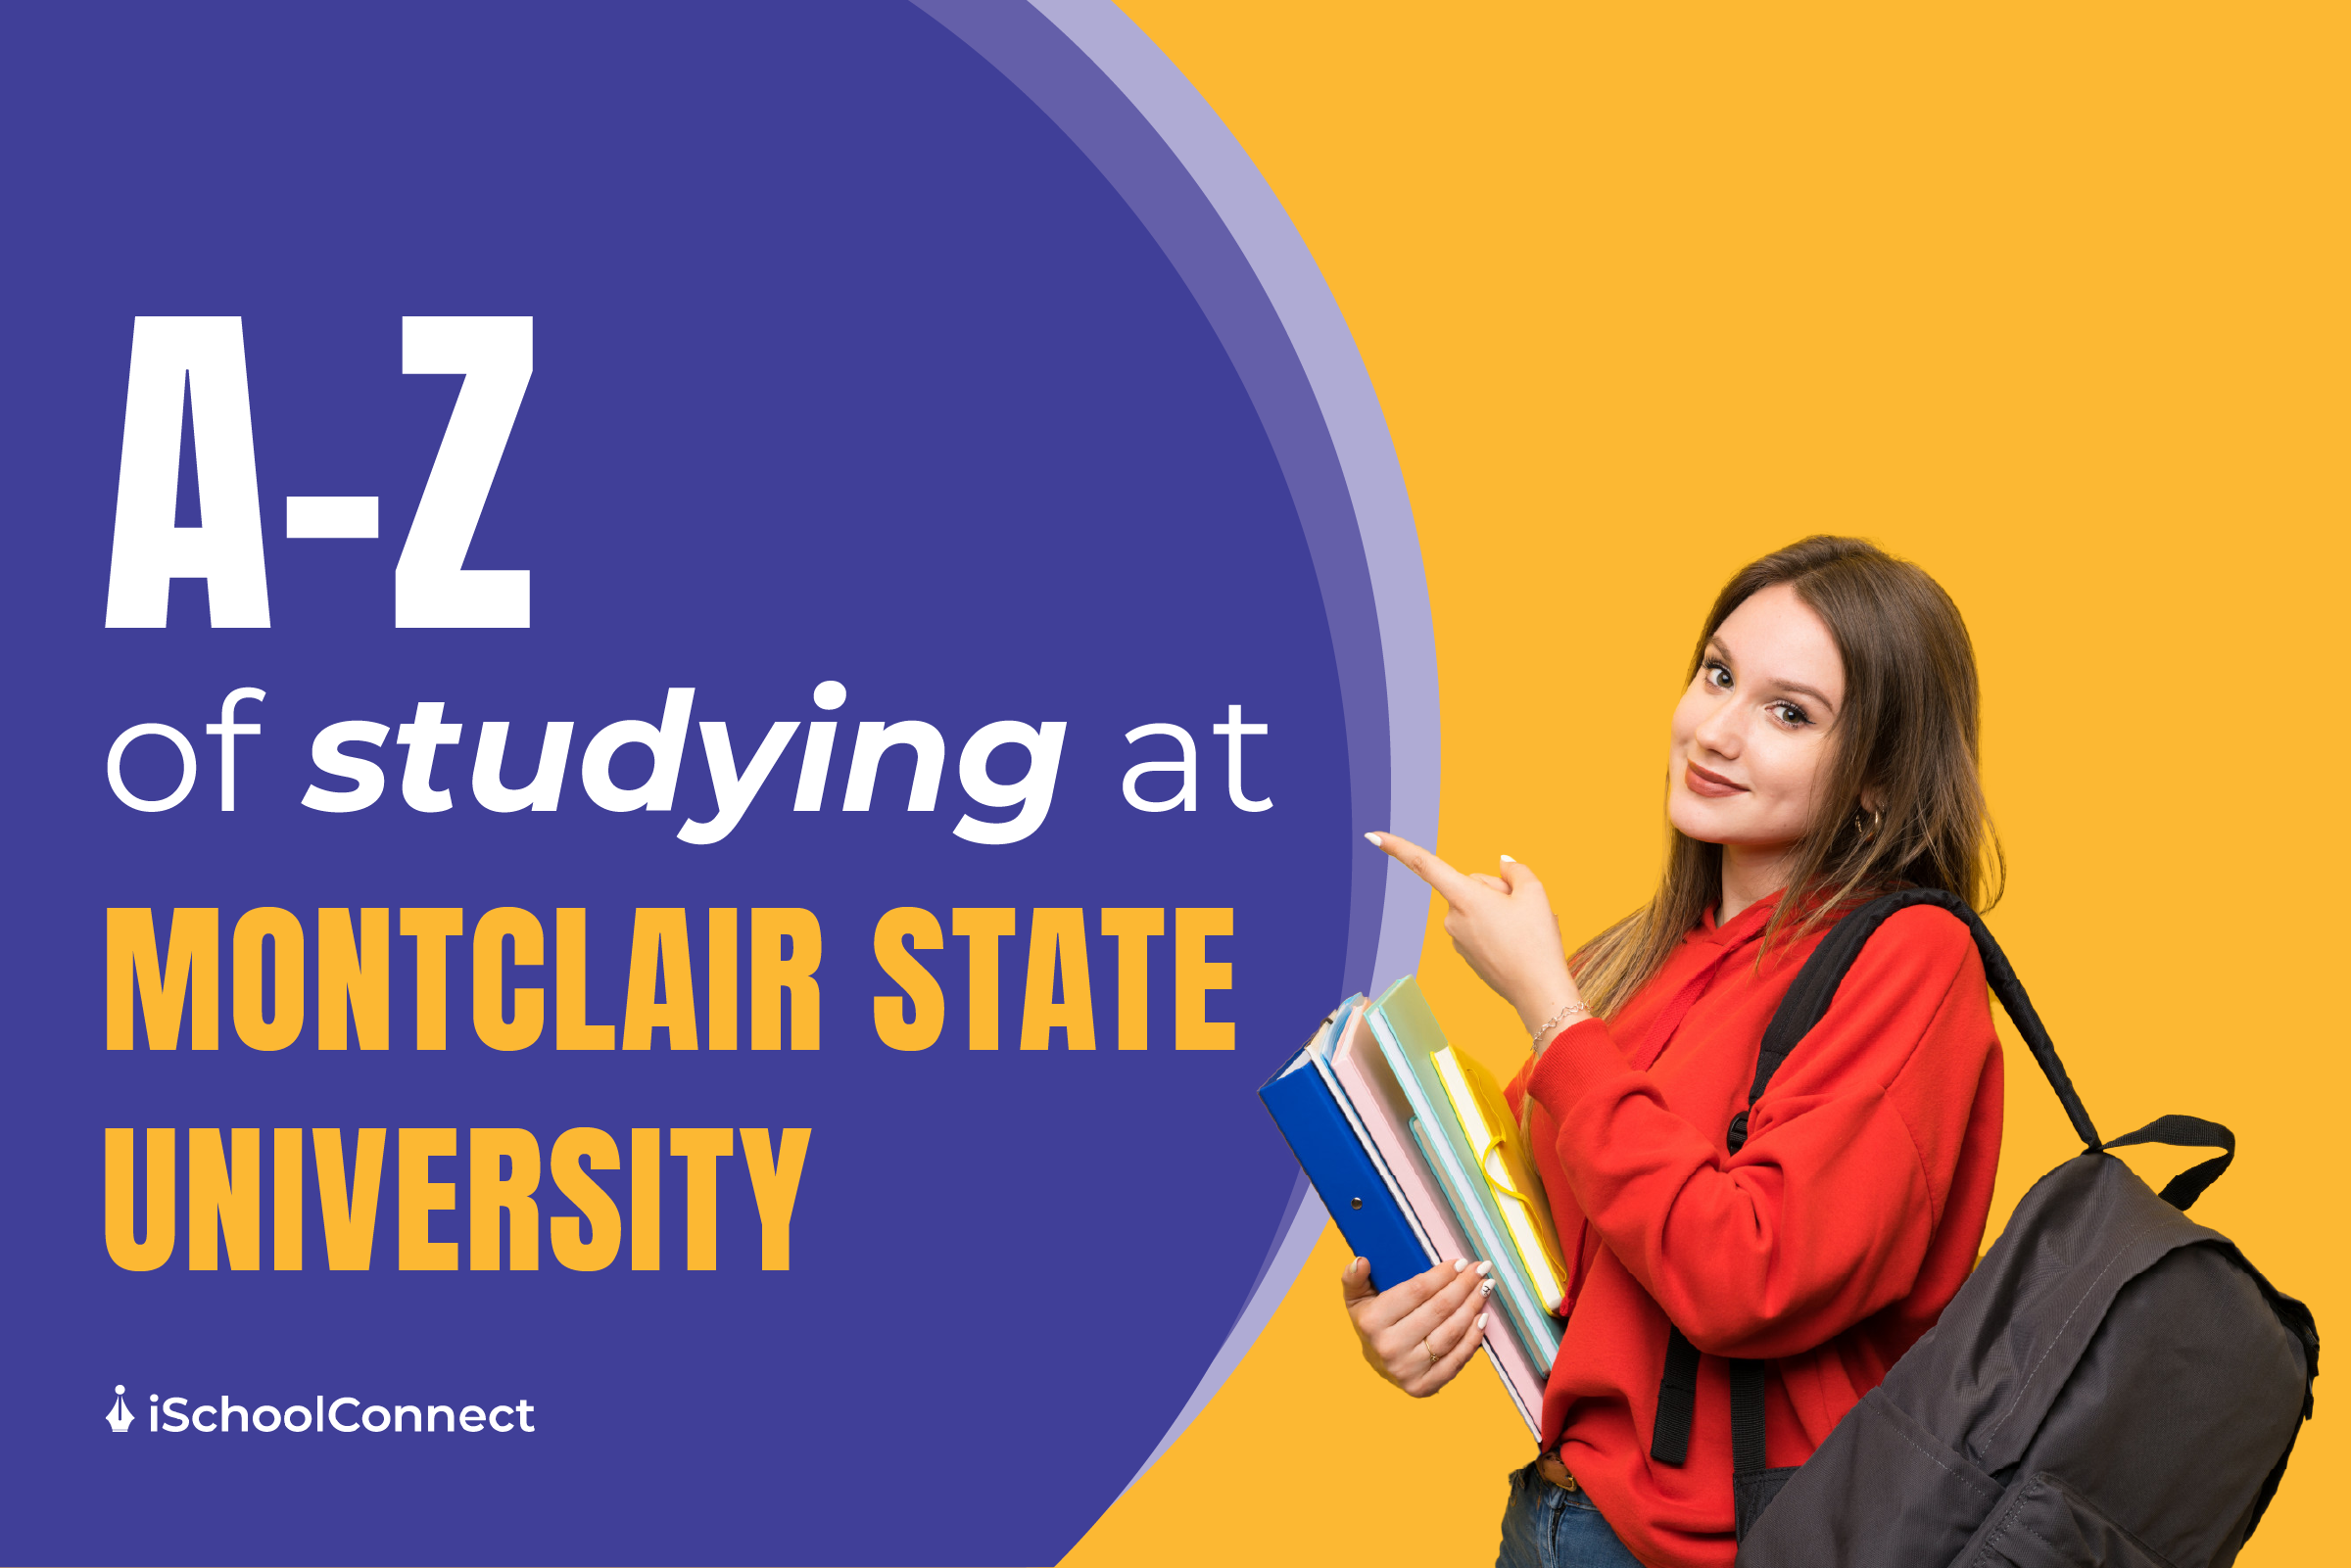 Montclair State University Rankings, courses, and more.